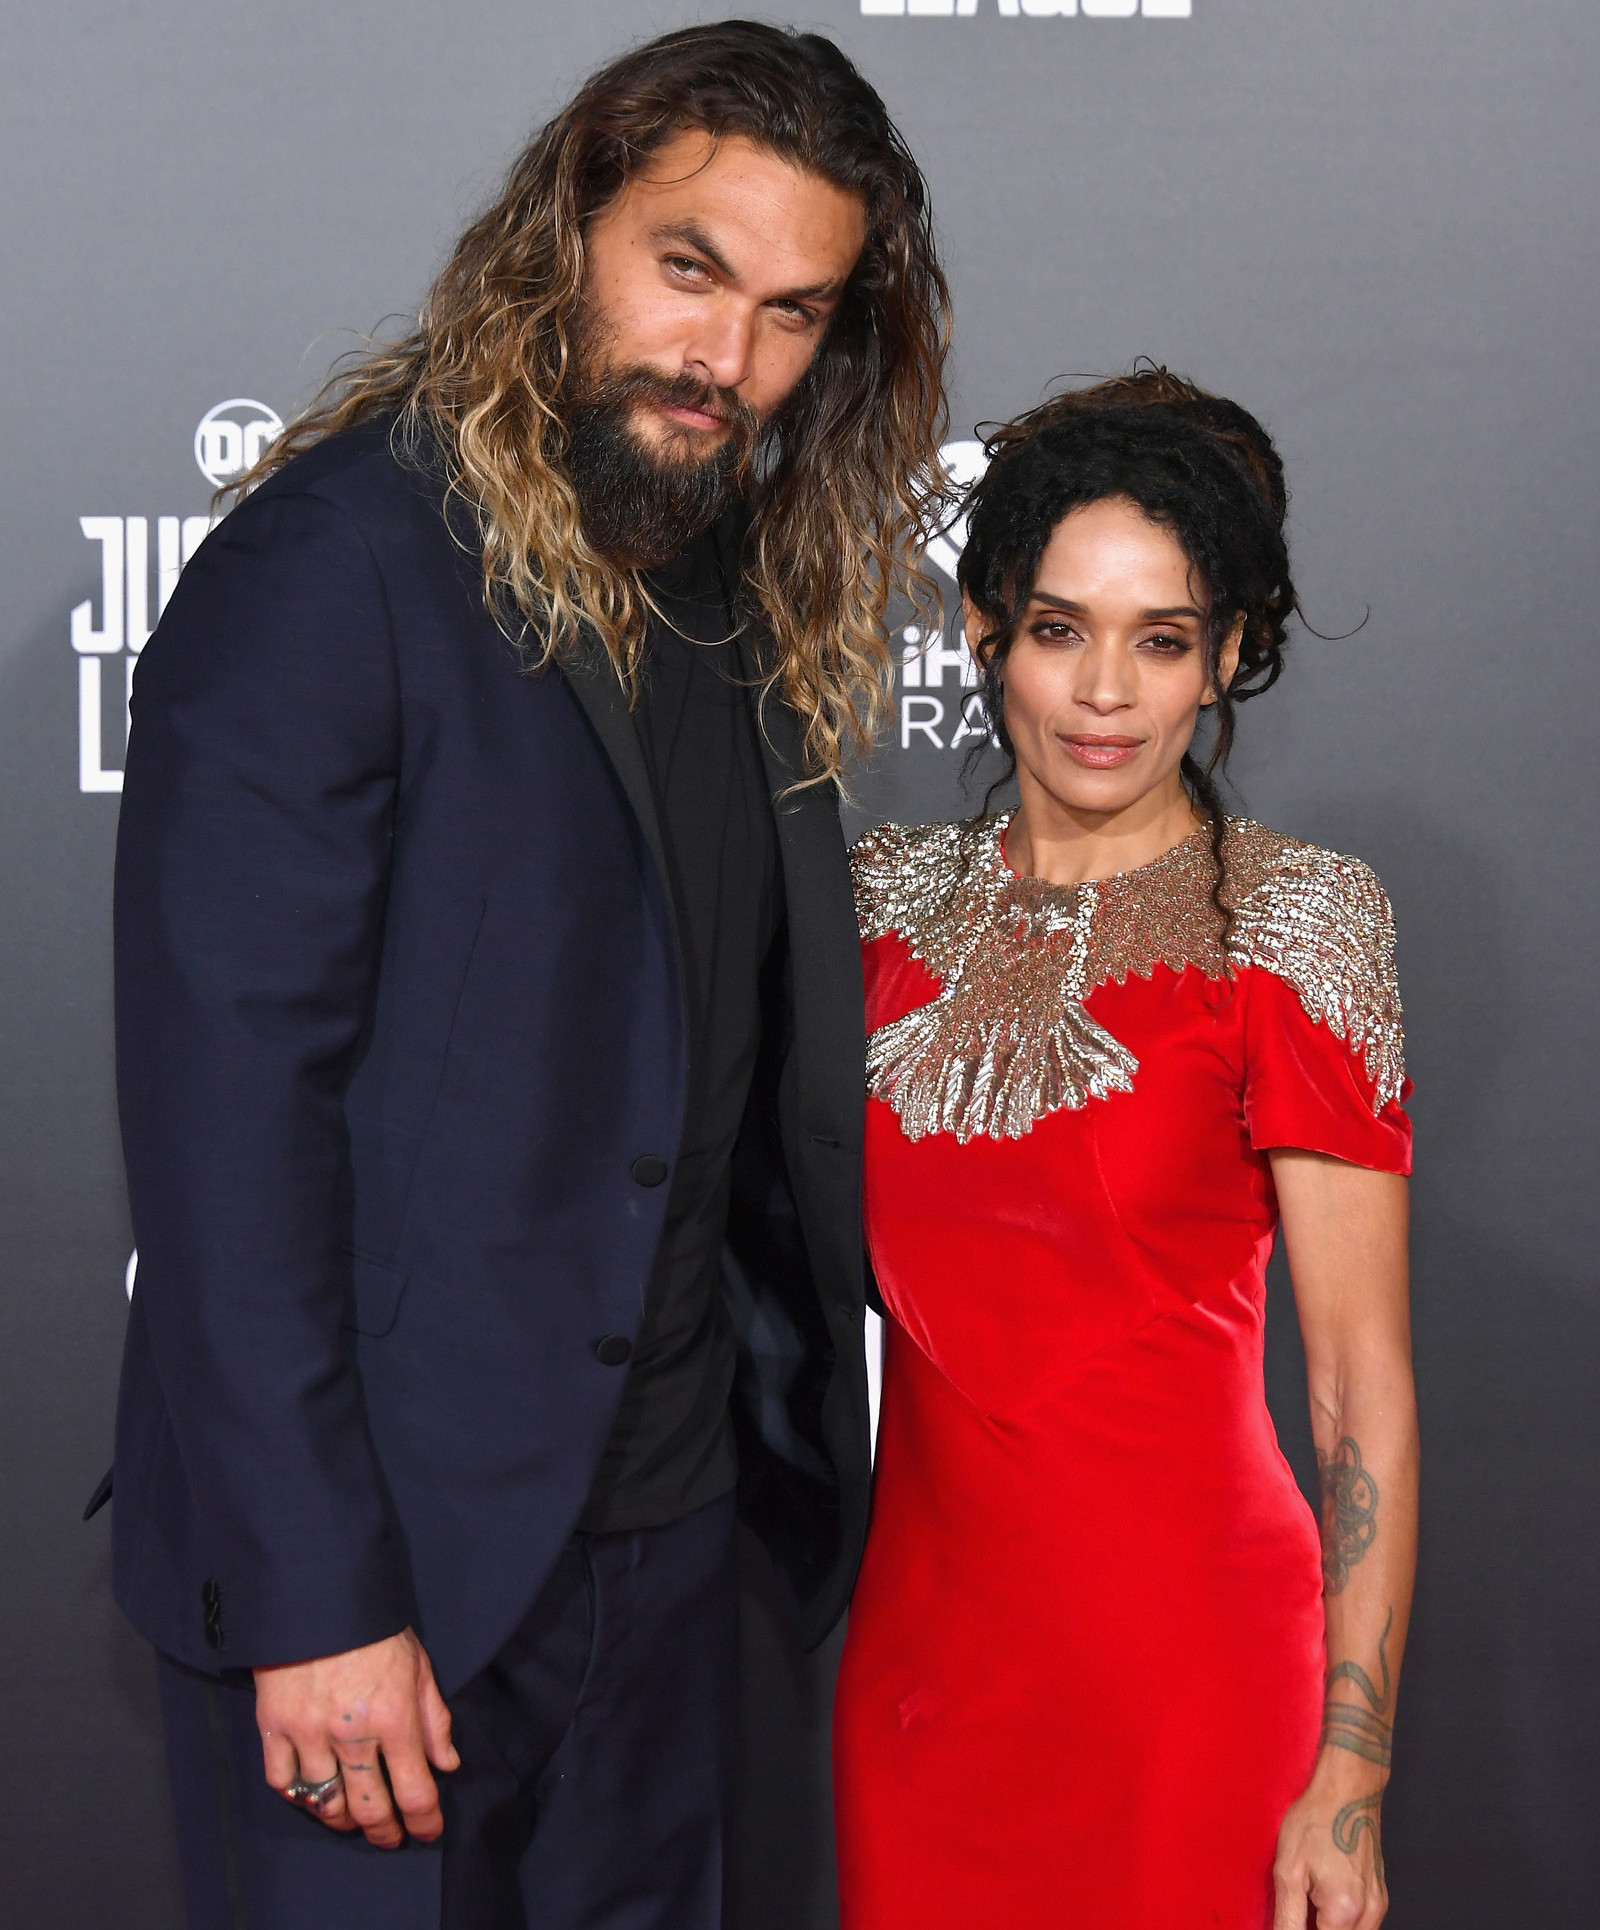 "Jason embodies a rare form of masculinity in this day and age – he’s a leader; he’s generous. Just in terms of charisma, physique, the right use of power, responsibility, work ethic, you can go down the line.” - Lisa Bonet Says She Was Able To Appreciate Jason Momoa More Because Of Her Absent Father